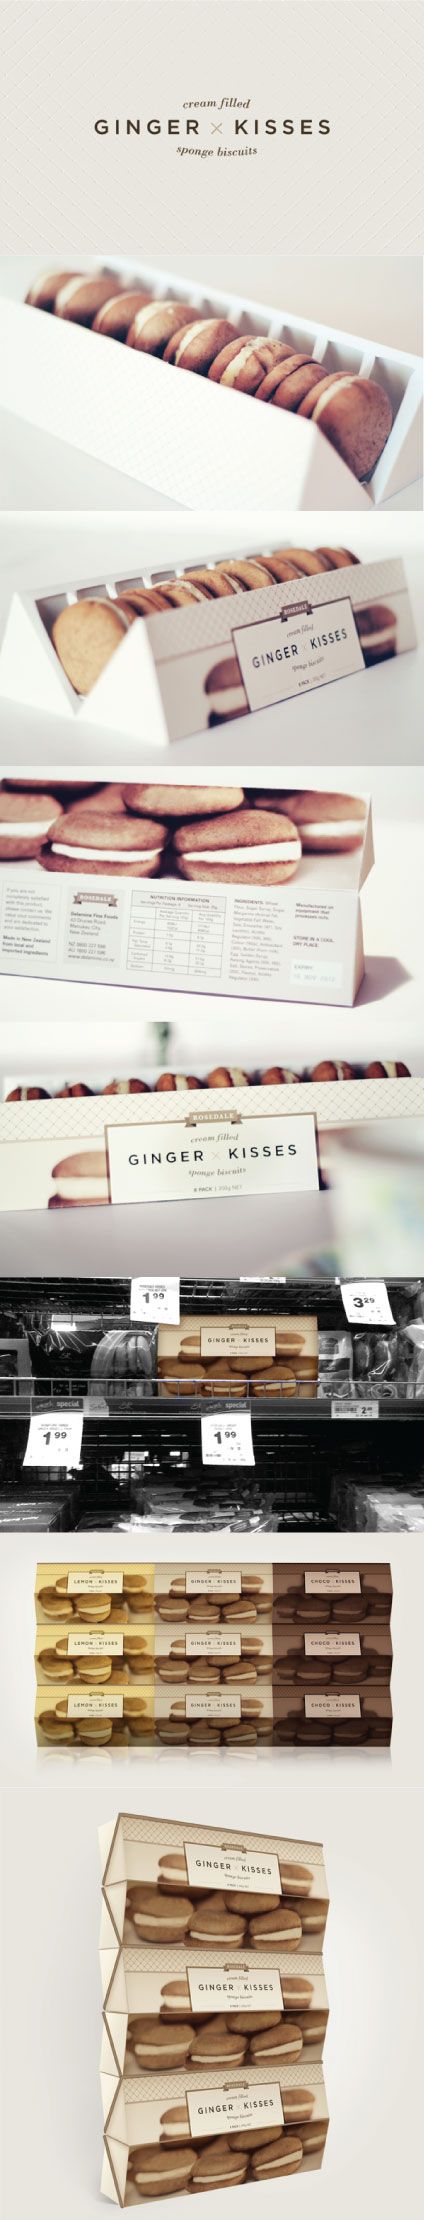 Ginger Kisses Packaging Re-design by Veronica Cordero. Well almost PD